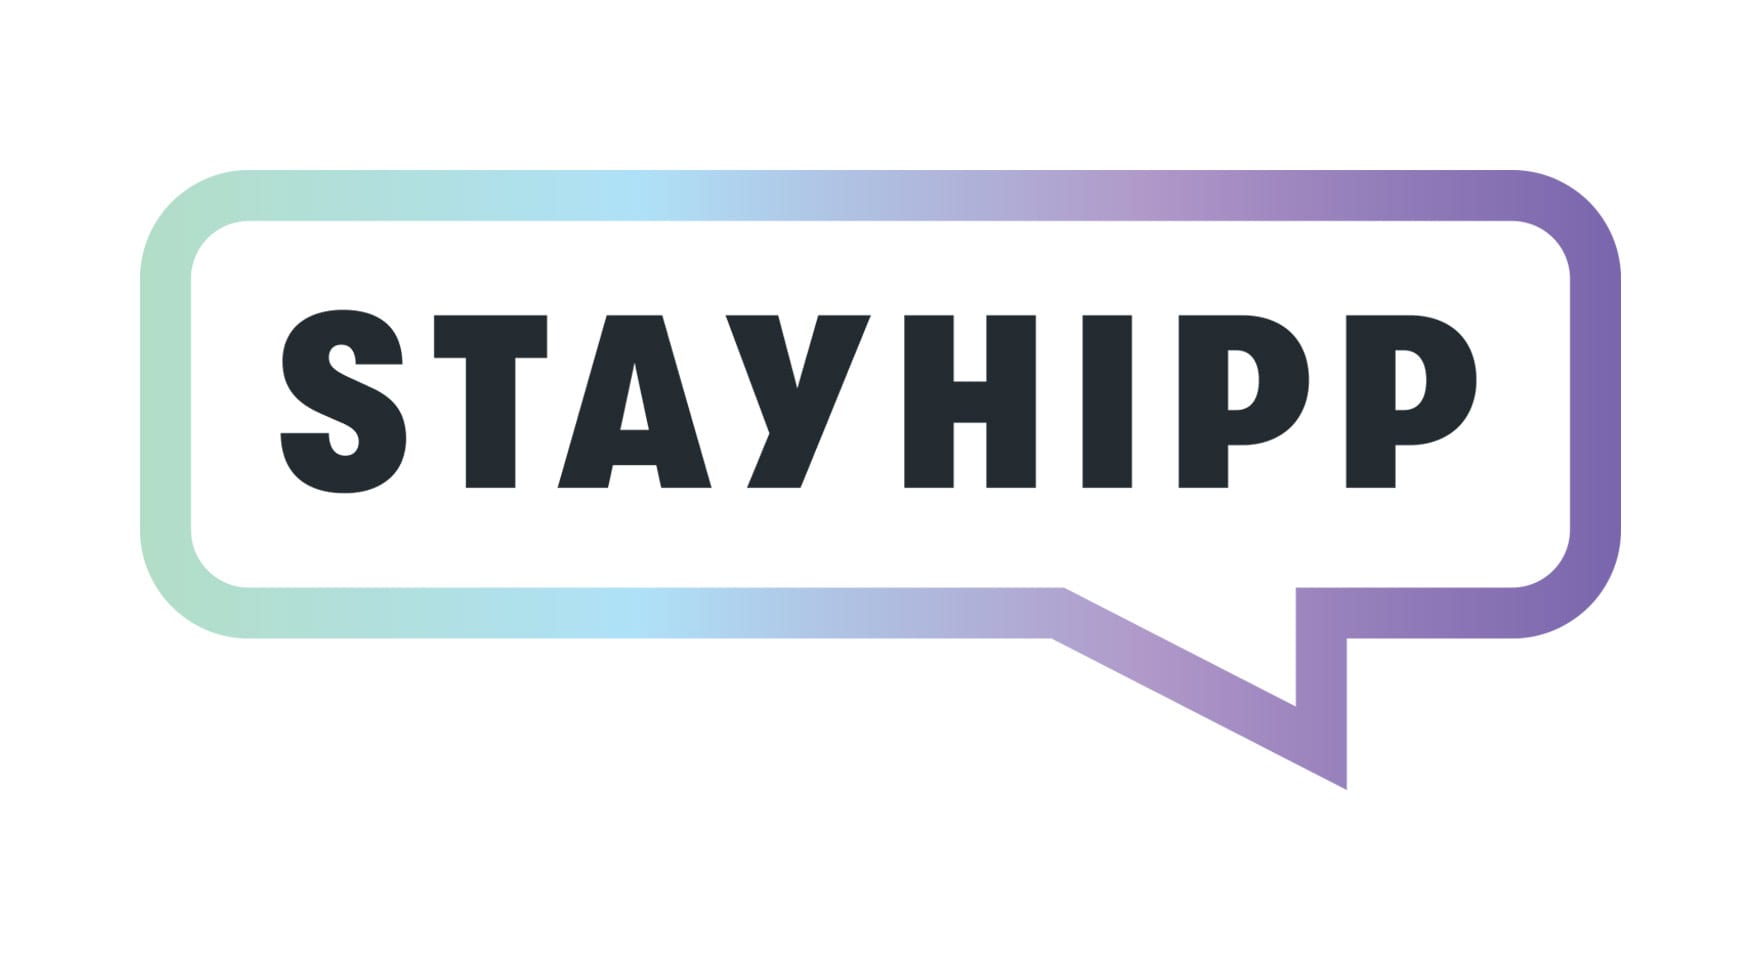 StayHipp | Digging into today’s trends so you don’t have to